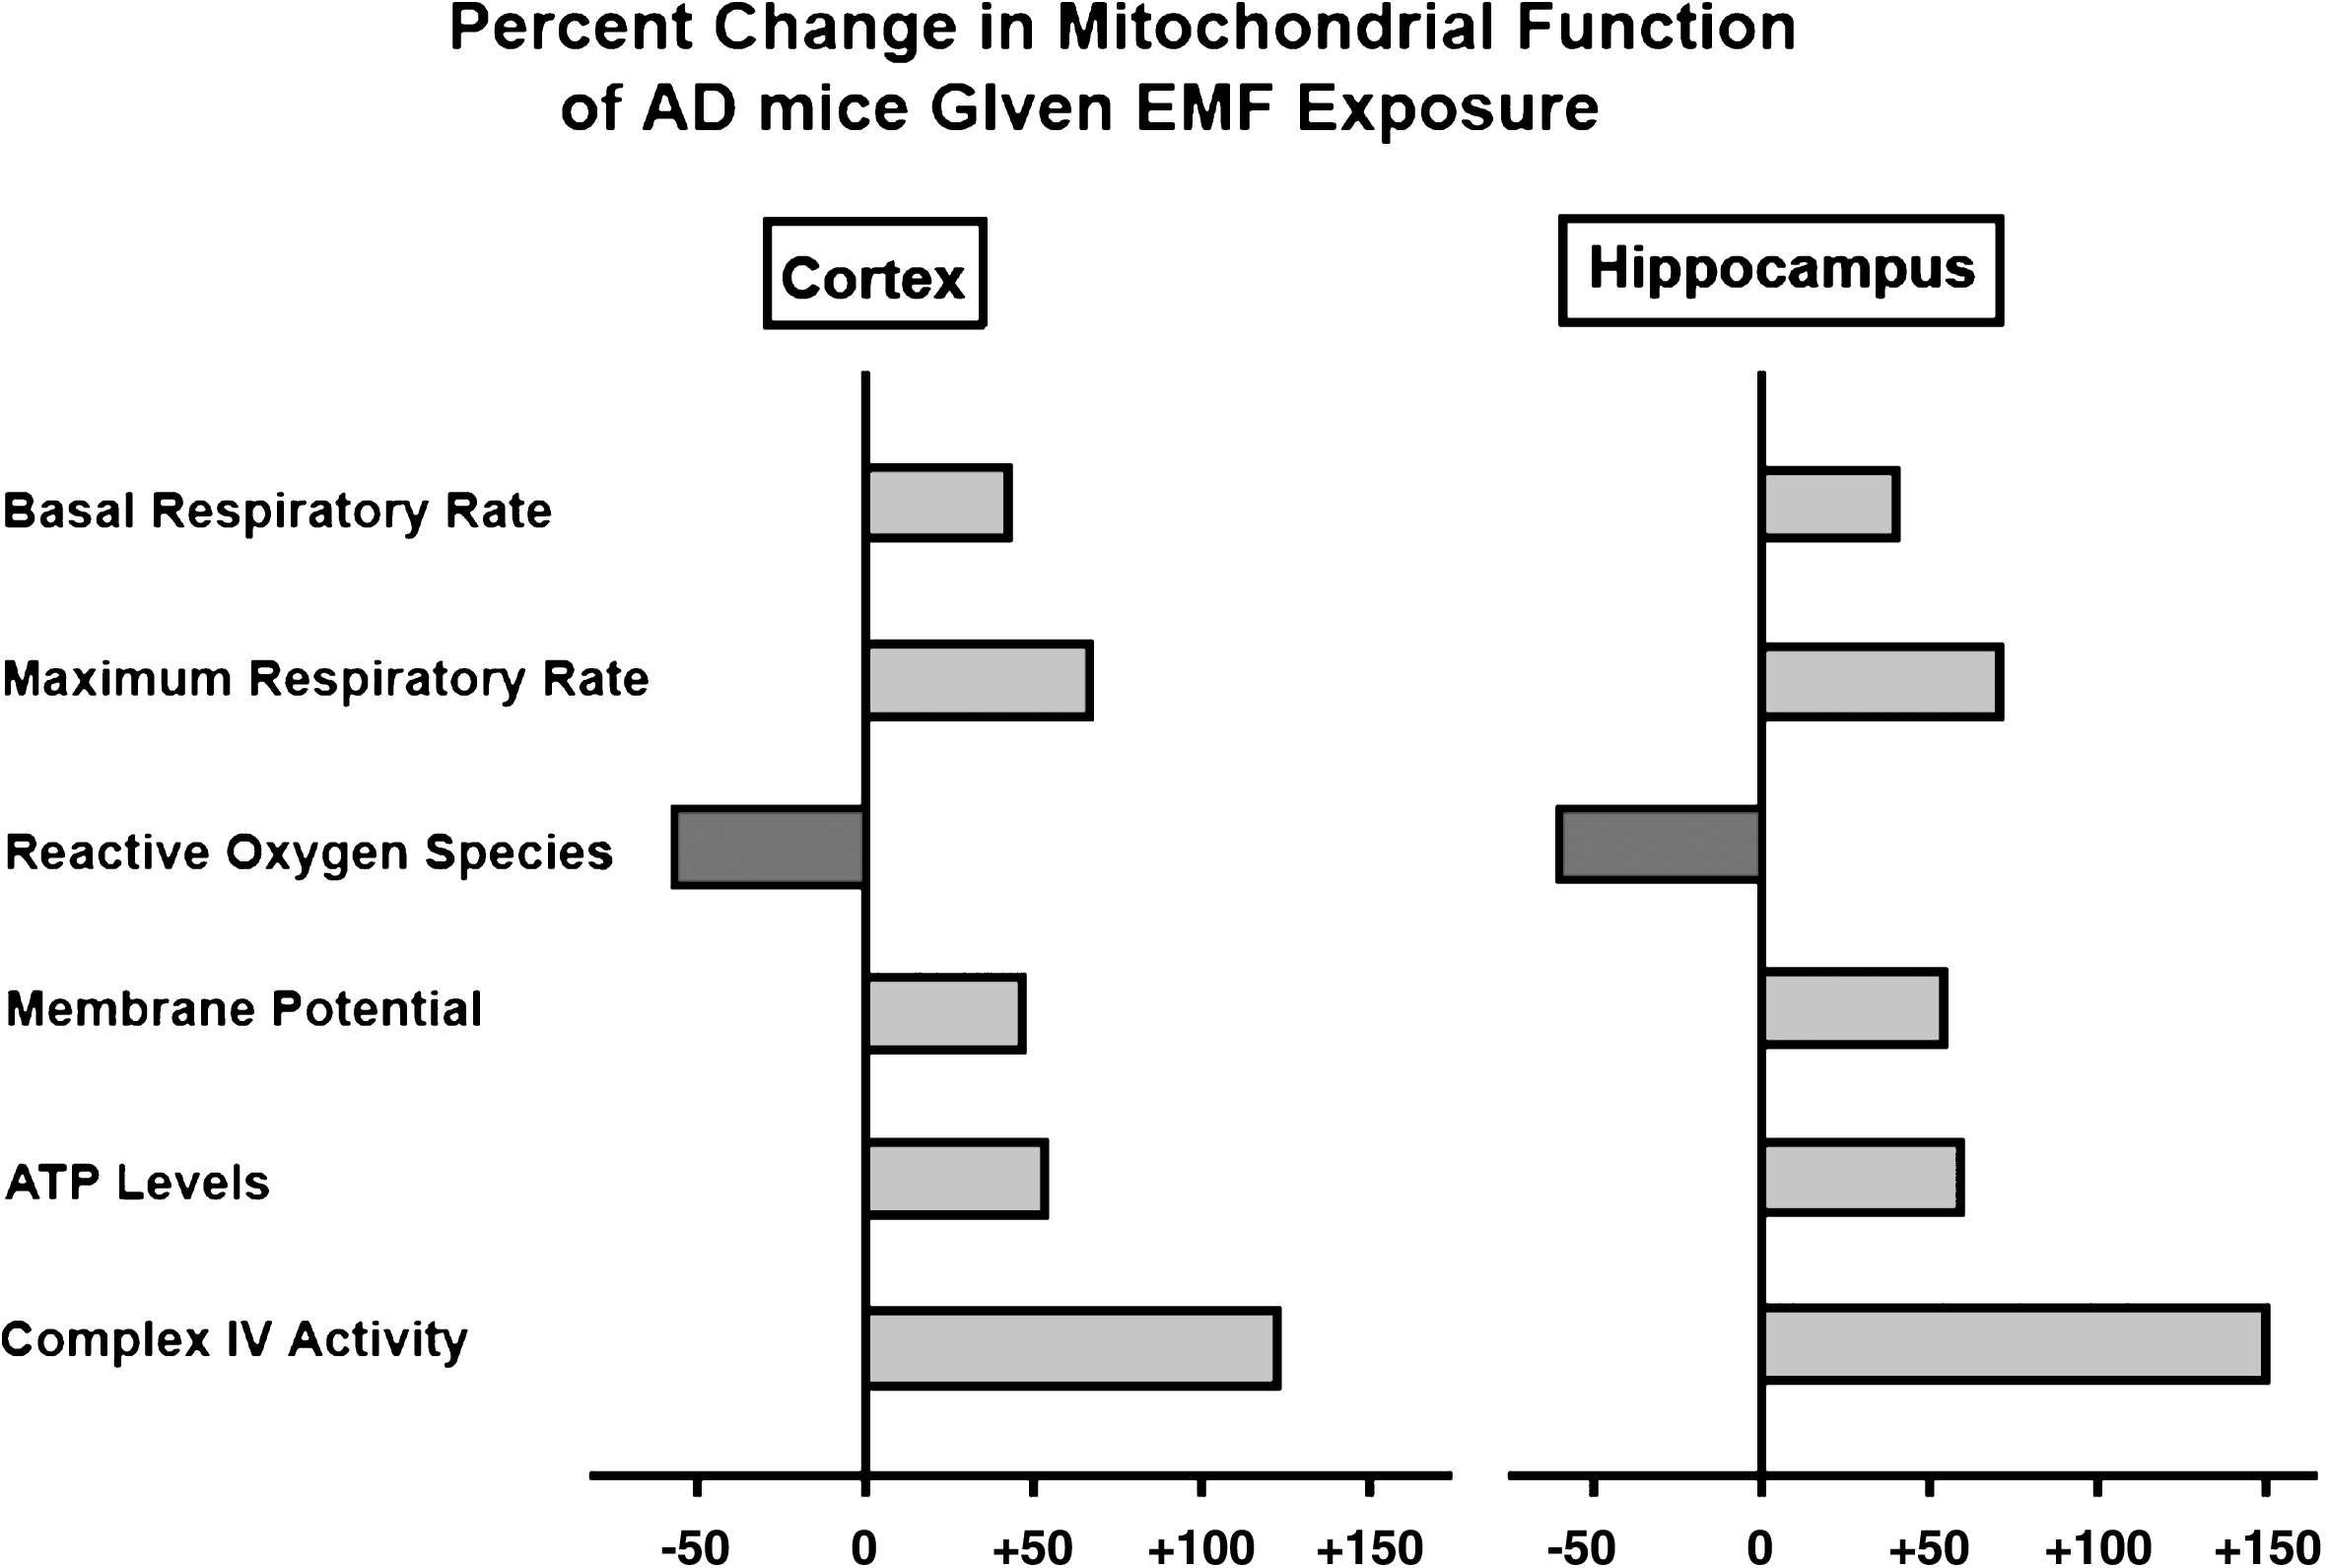 EMF treatment greatly enhances mitochondrial function within both cerebral cortex and hippocampus of aged AD (Tg) mice. Shown are percent changes across six measures of mitochondrial function, wherein 50–150% enhancements were induced by EMF treatment.